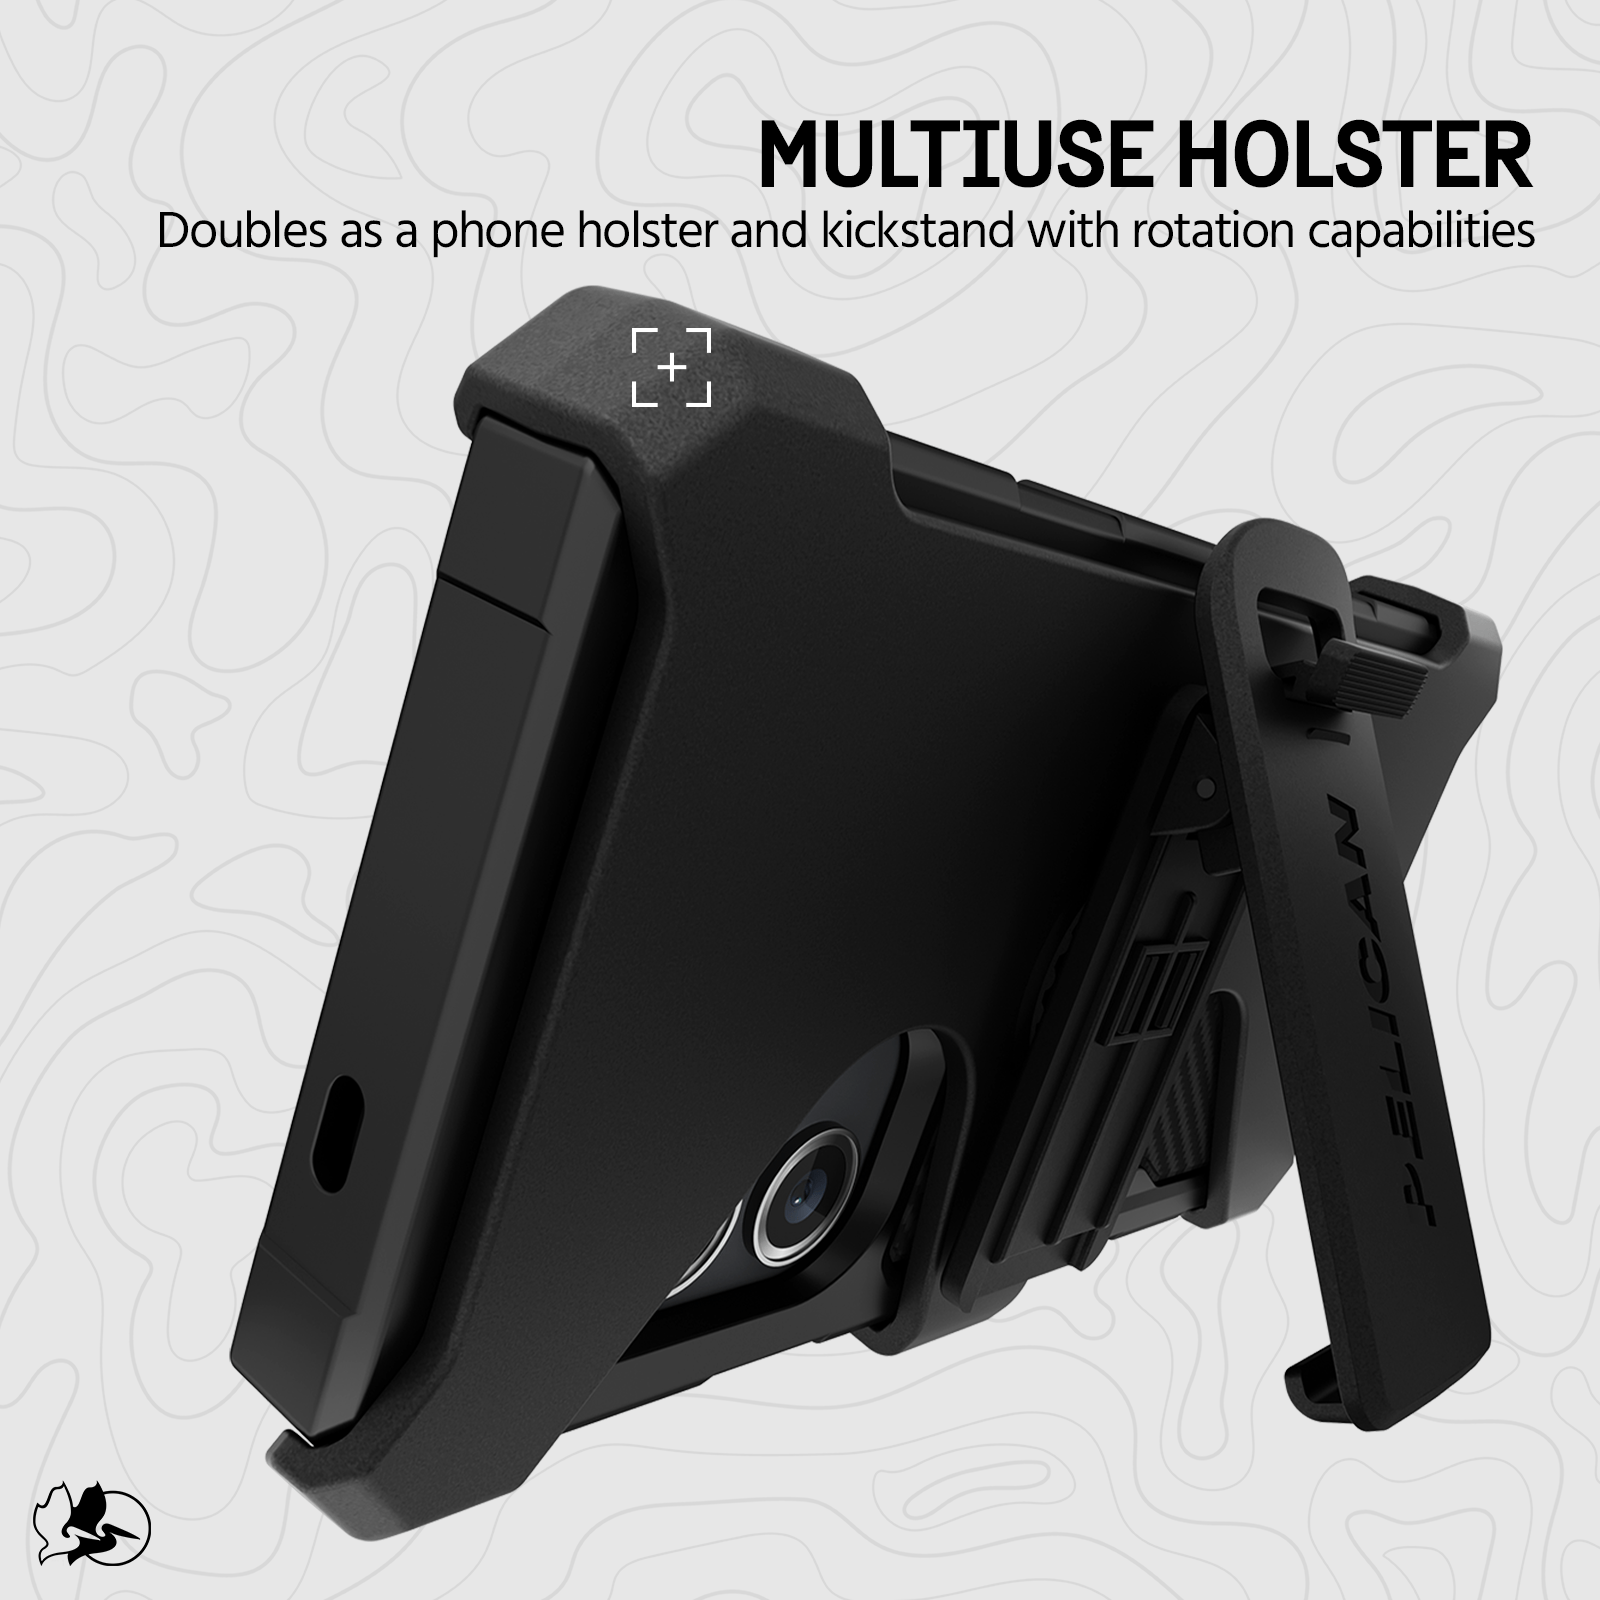 MULTIUSE HOLSTER DOUBLES AS A PHONE HOLSTER AND KICKSTAND WITH ROTATION CAPABILITIES